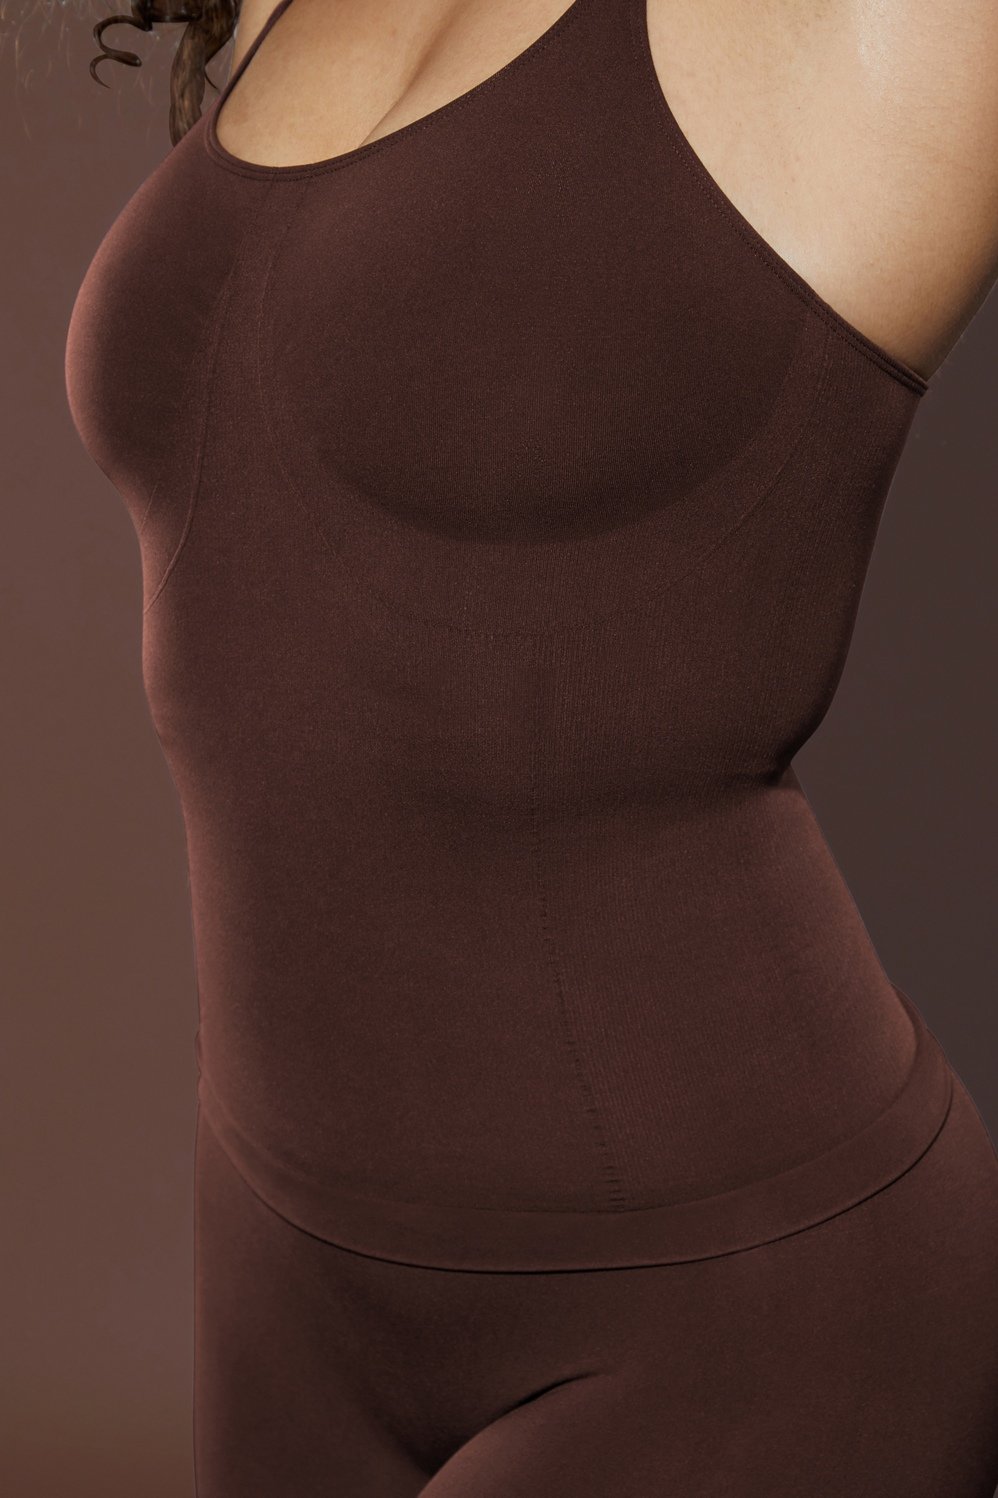 Nearly Naked Shaping Cami Tank - Fabletics